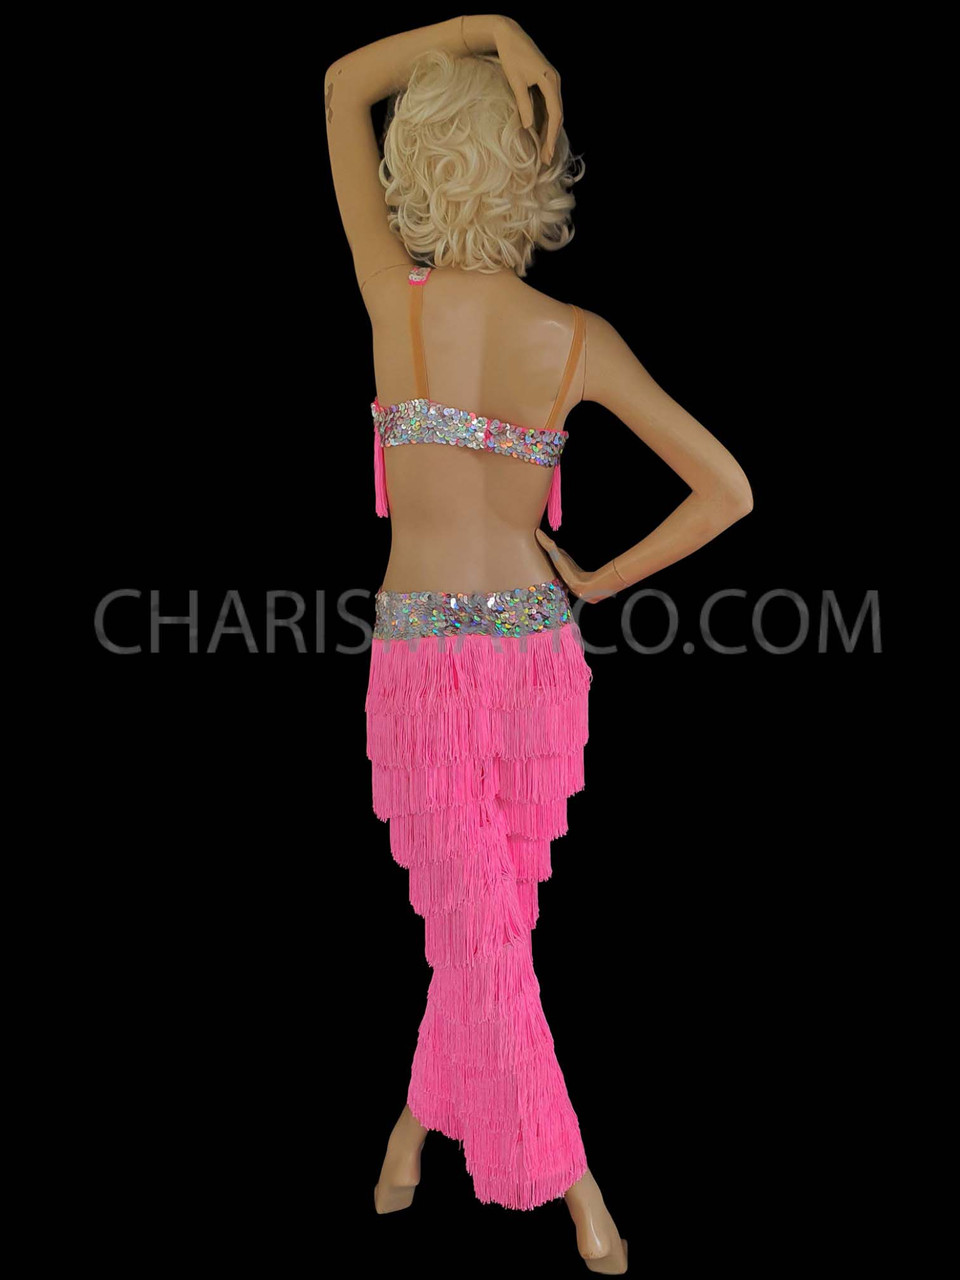 Low-Rise Neon Pink Fringe Dance Pants With Matching Fringe Top